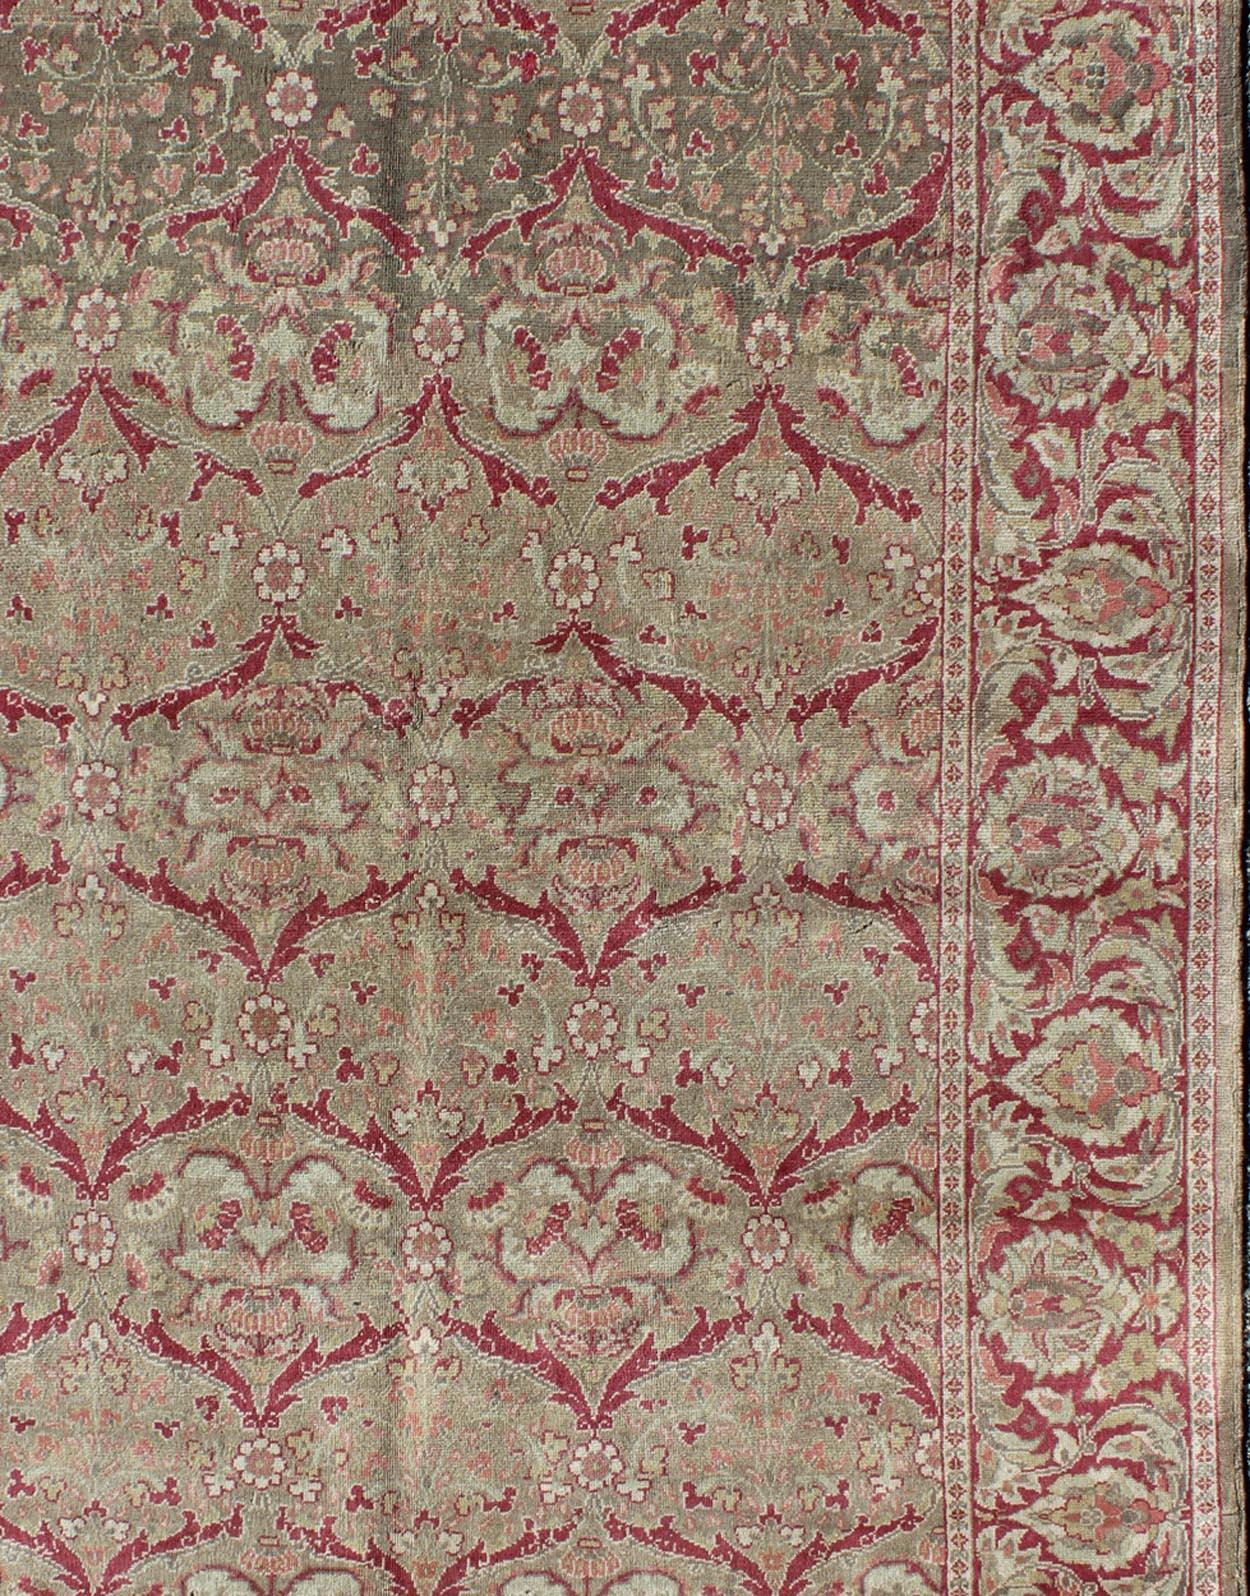 Oushak Vintage Turkish Sivas Rug in Burgundy Red, Cream, & Taupe with All-Over Design For Sale